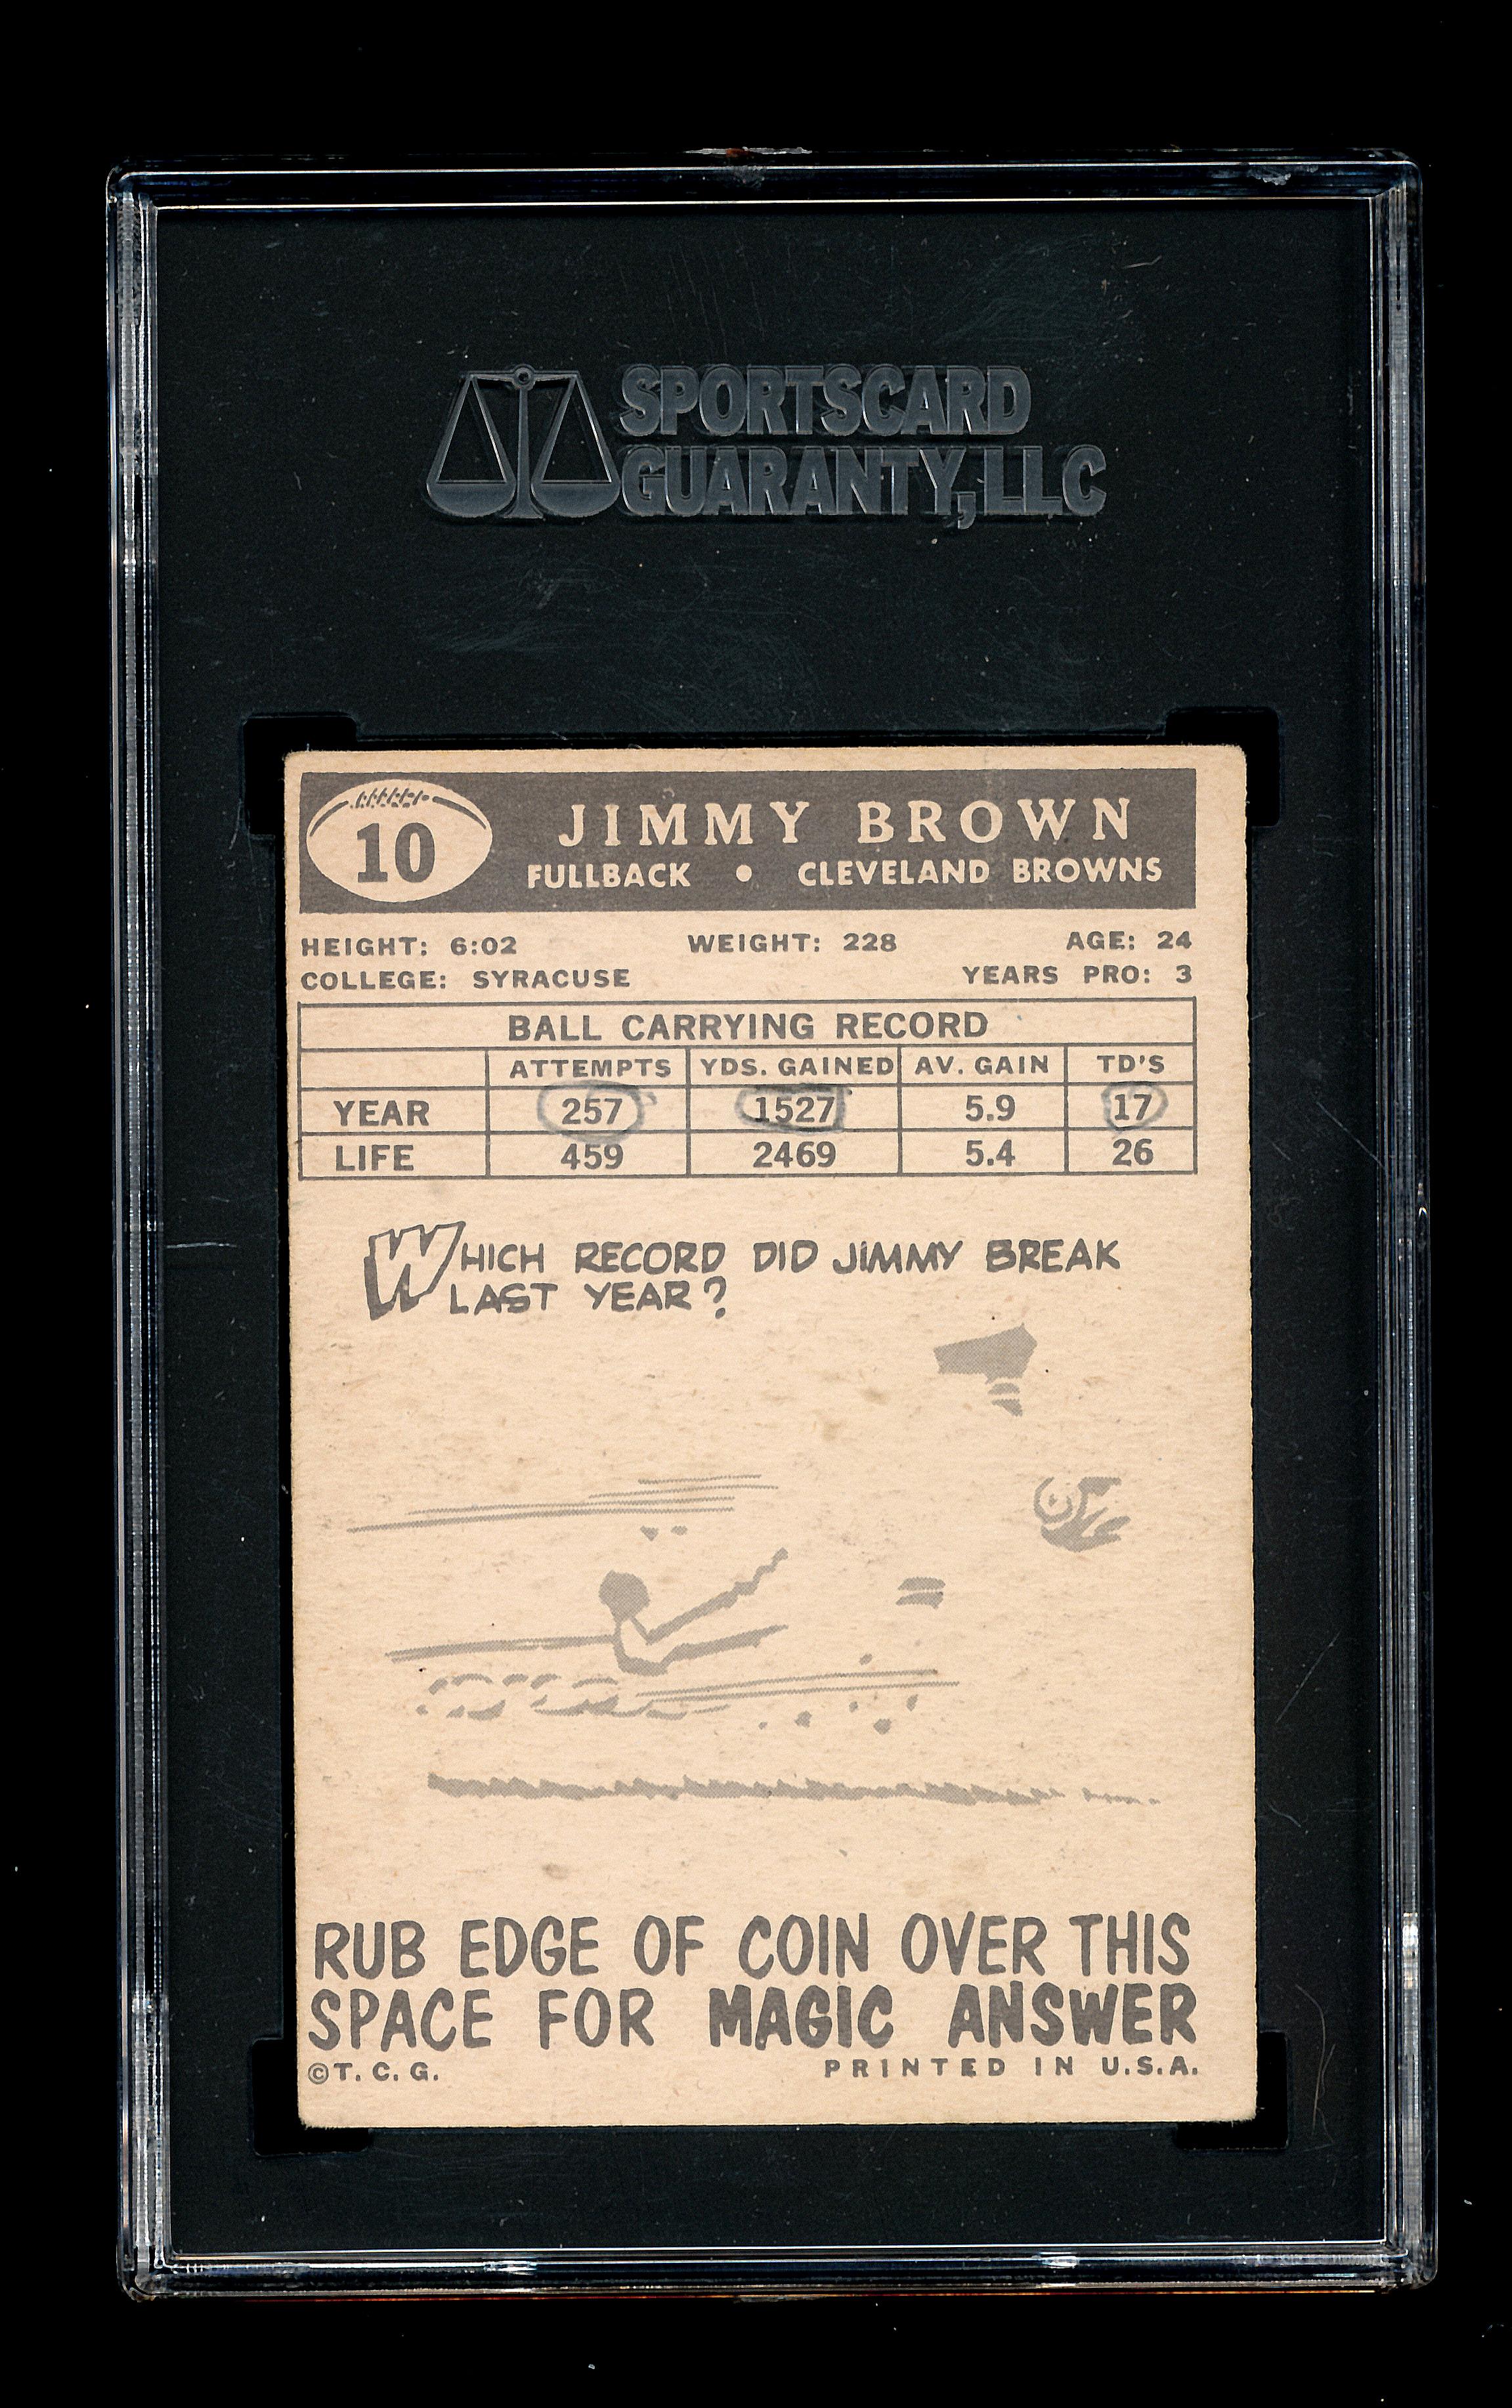 1959 Topps Football Card #10 Hall of Famer Jimmy Brown Cleveland Browns. Ce